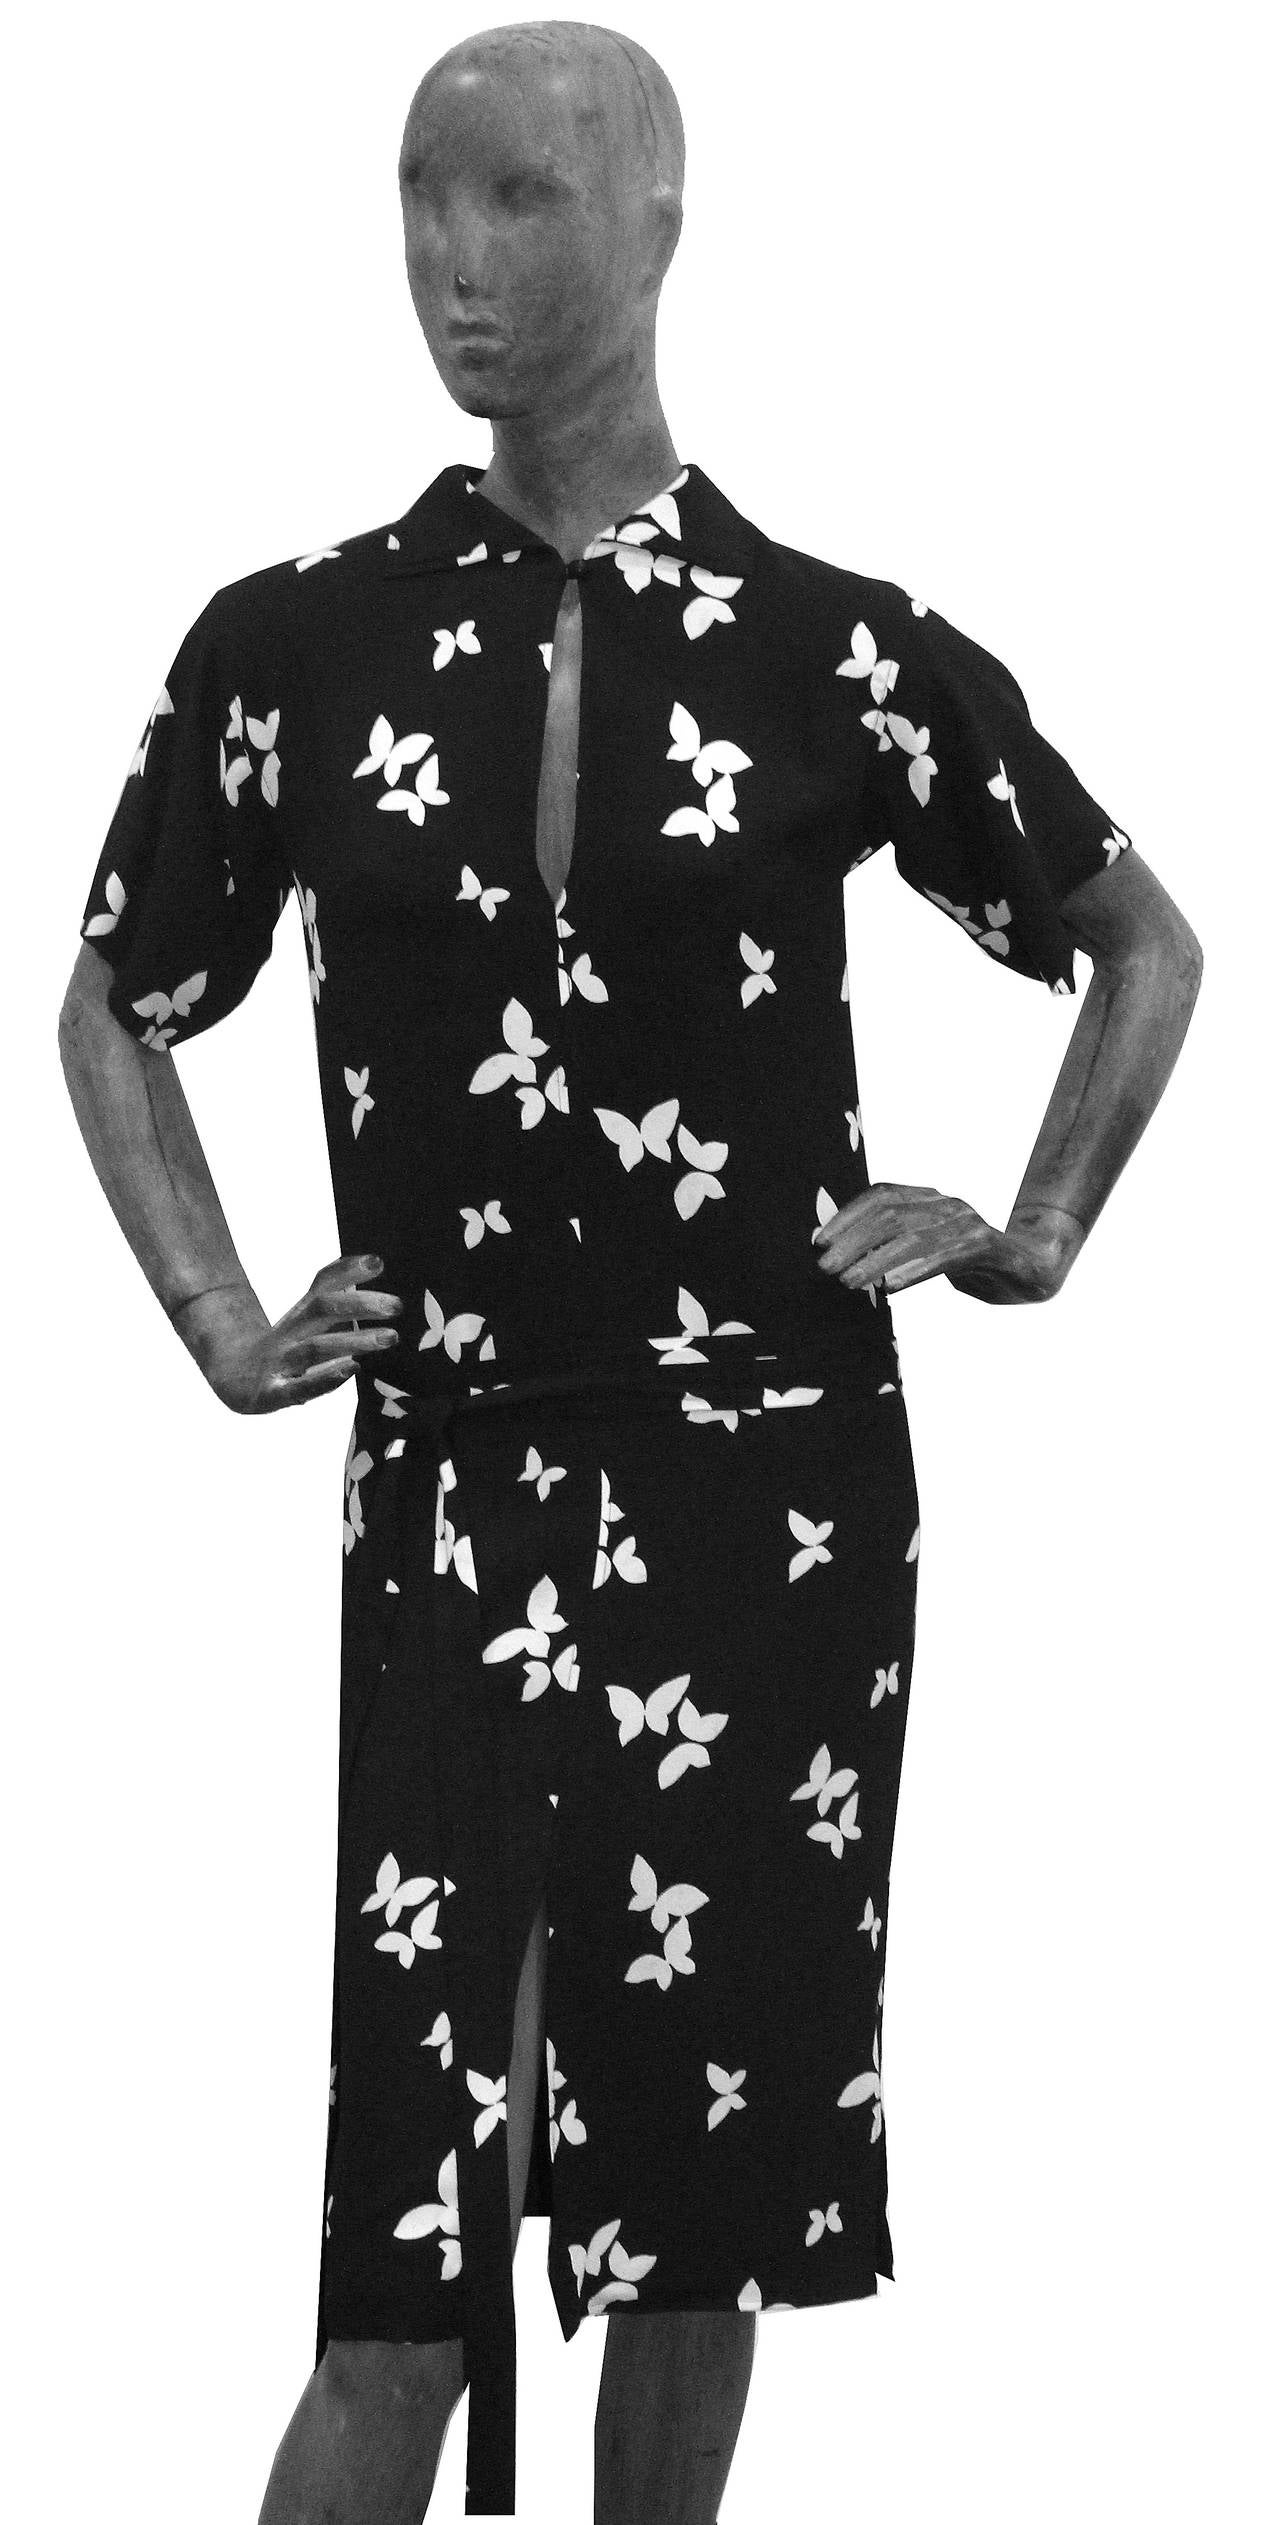 A rare Yves Saint Laurent moss crepe dress from the Spring/Summer 1978 collection. The dress features a butterfly abstract in print in contrasting black and white, extra long tie up waist belt, front and side slits and 1 button up collar. The dress